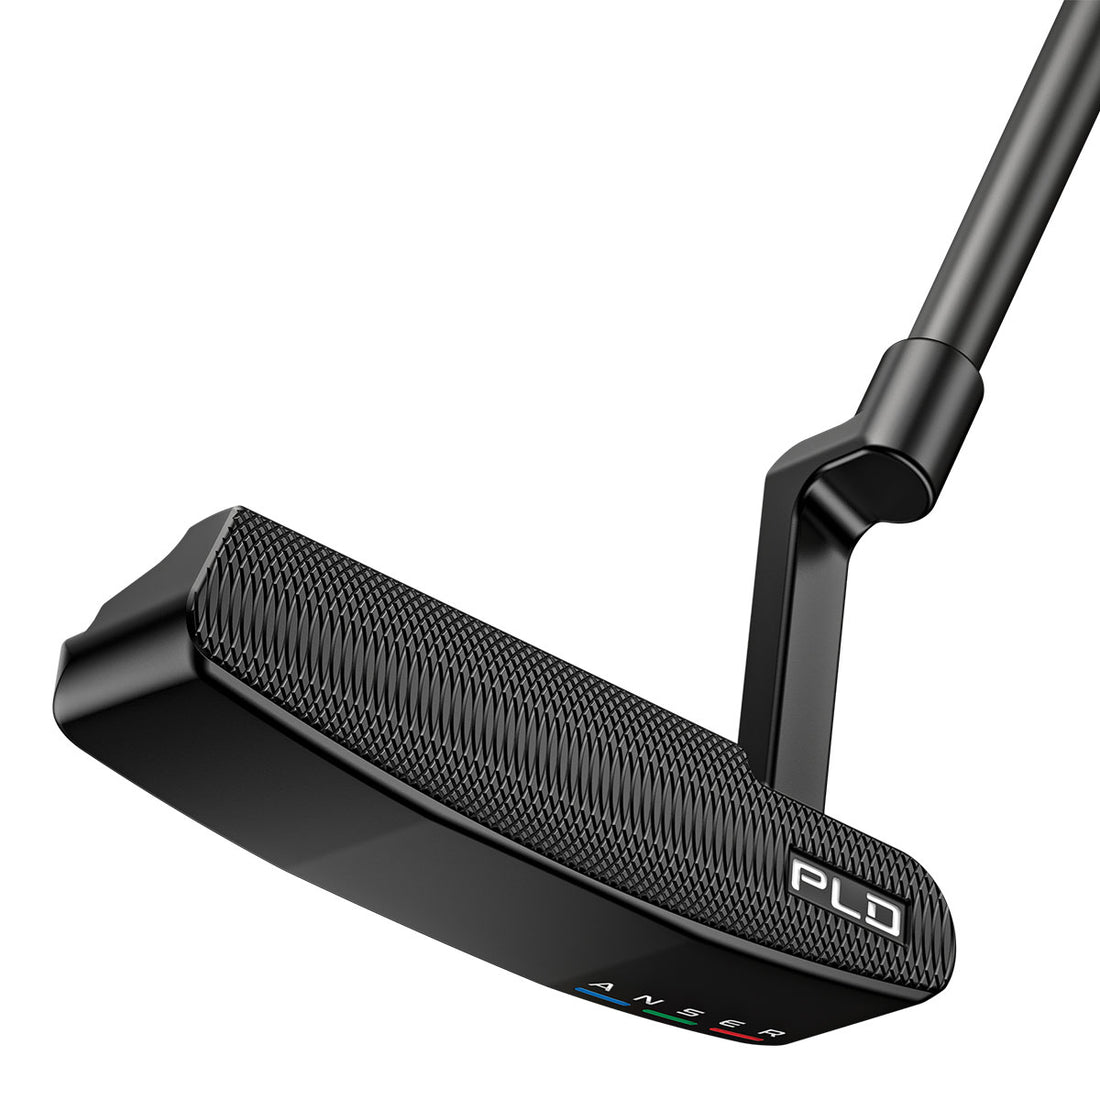 PING ANSER PLD MILLED PUTTER